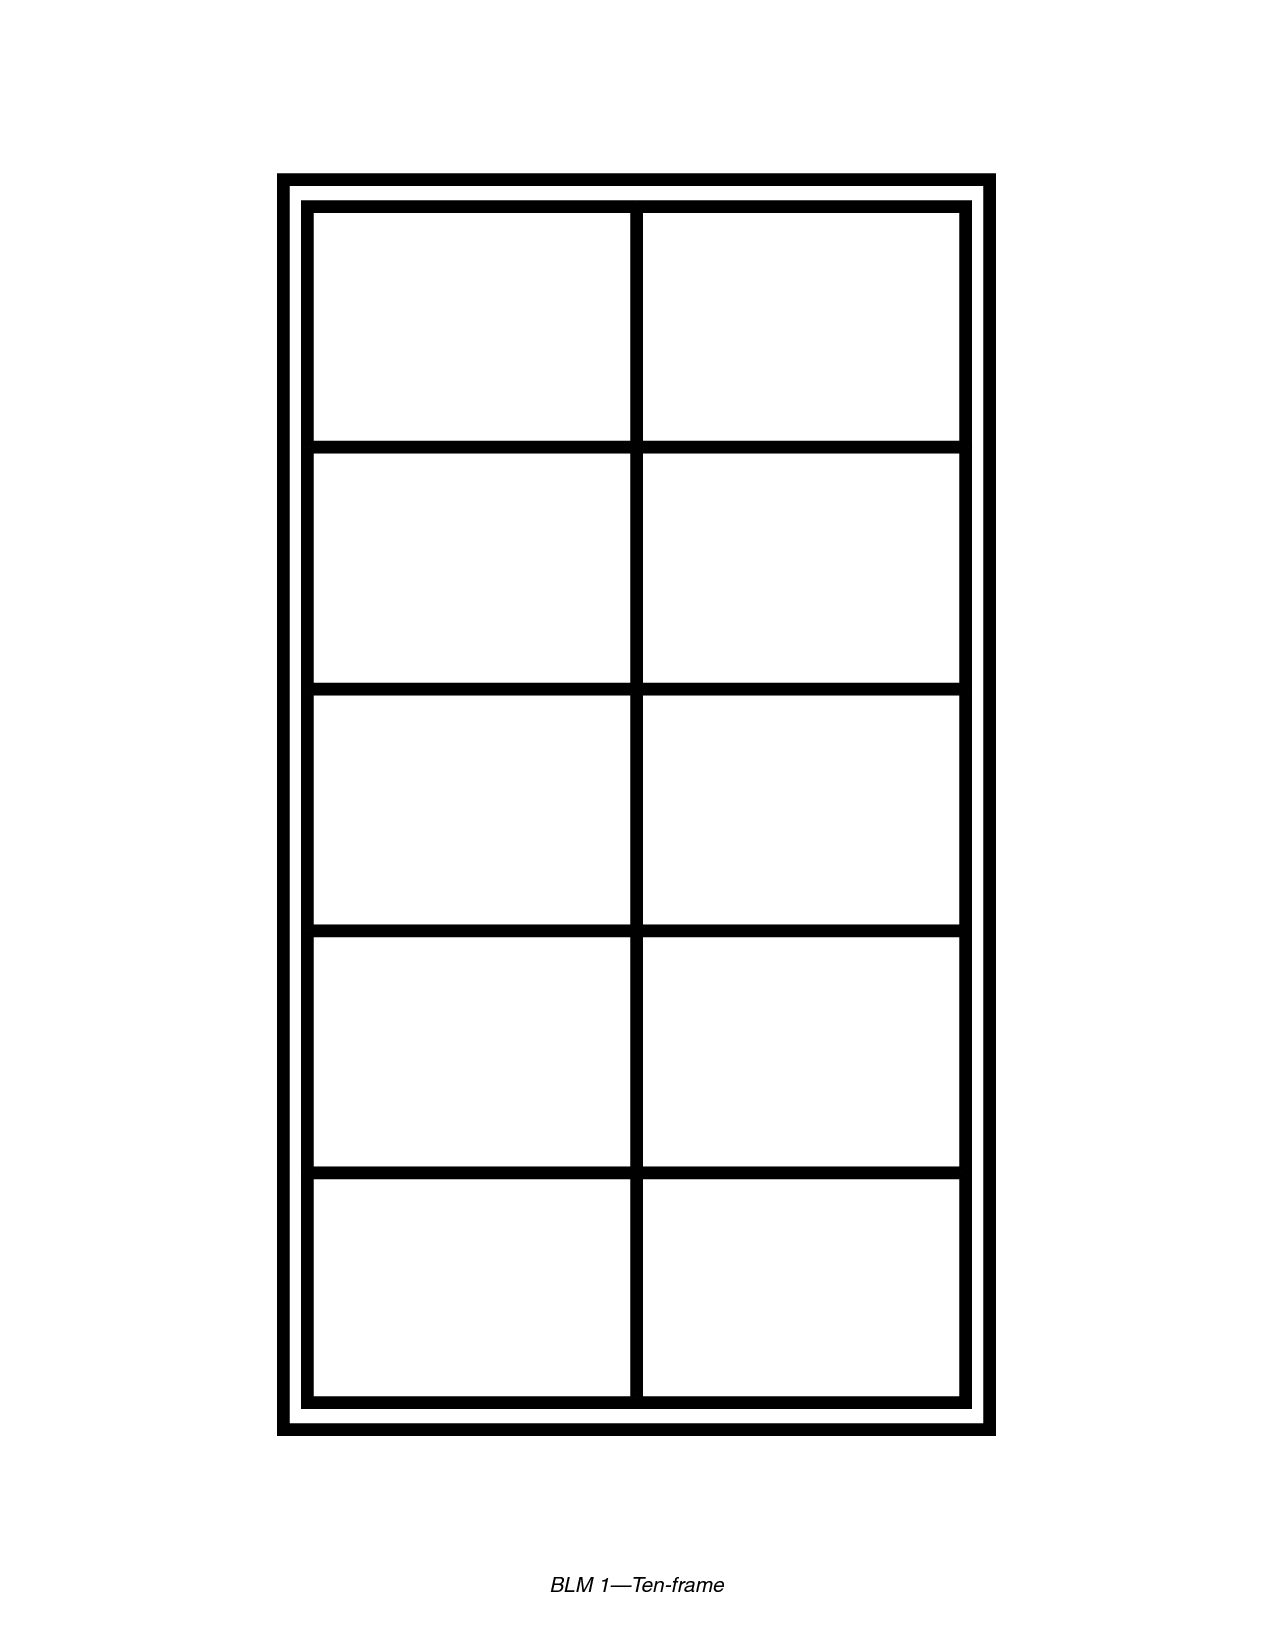 6 Best Images of Free Printable Tens Frames Templates Blank Ten